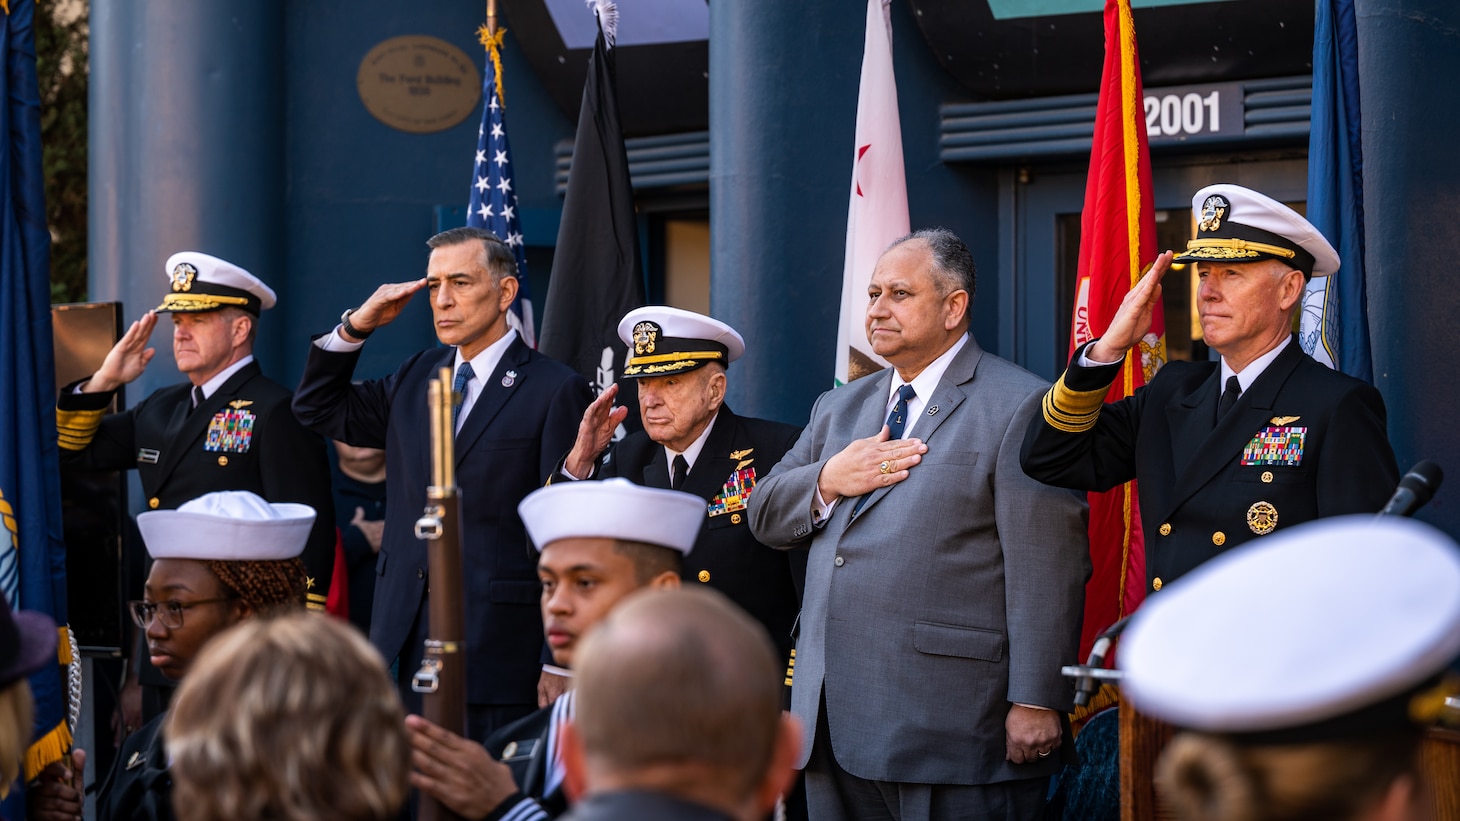 SAN DIEGO (Jan. 20, 2023) — (from left) Adm. Samuel J. Paparo, U.S. Rep. Darrell Issa, retired U.S. Navy Capt. E. Royce Williams, Secretary of the Navy Carlos Del Toro, and Vice Adm. Kenneth Whitesell render honors during a ceremony awarding Williams with a Navy Cross Jan. 20. Del Toro was in San Diego for various fleet engagements, awards ceremonies and ship events.